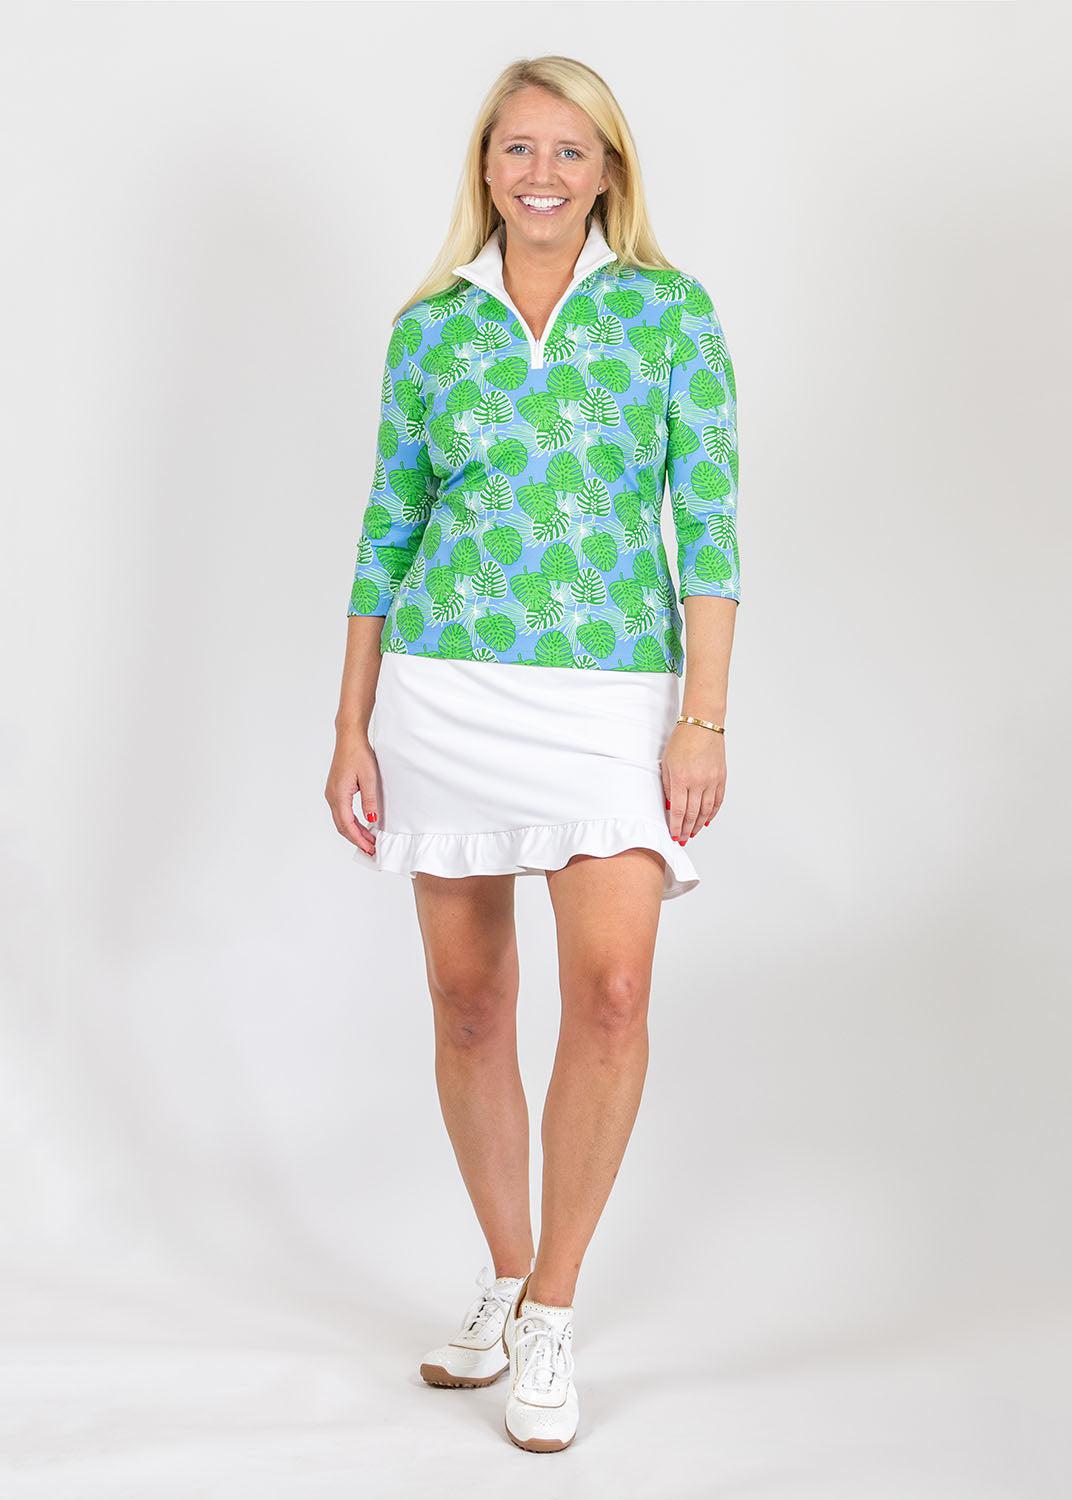 4 Sleeve Top in a Palm Print